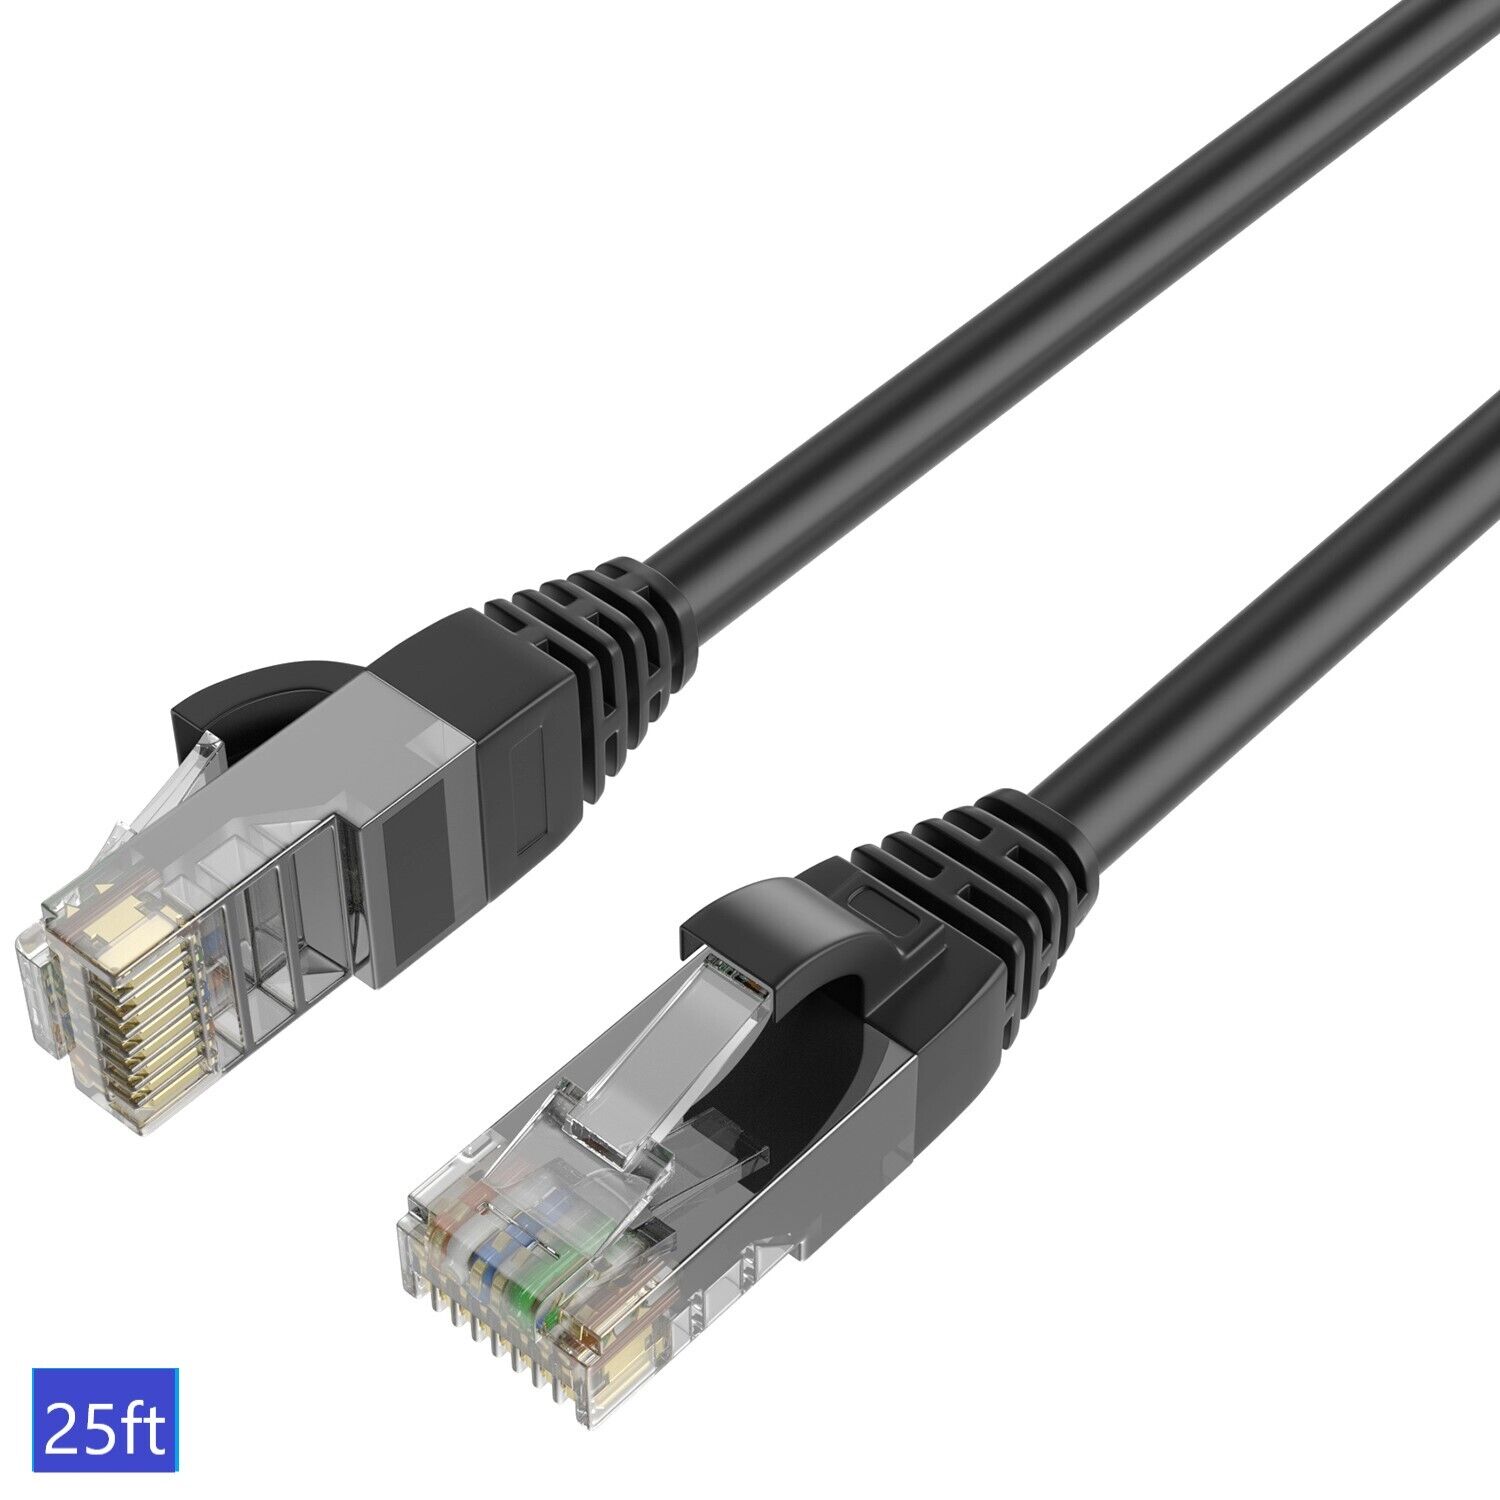 QualGear CAT 6 High-Speed Ethernet Cable - Black